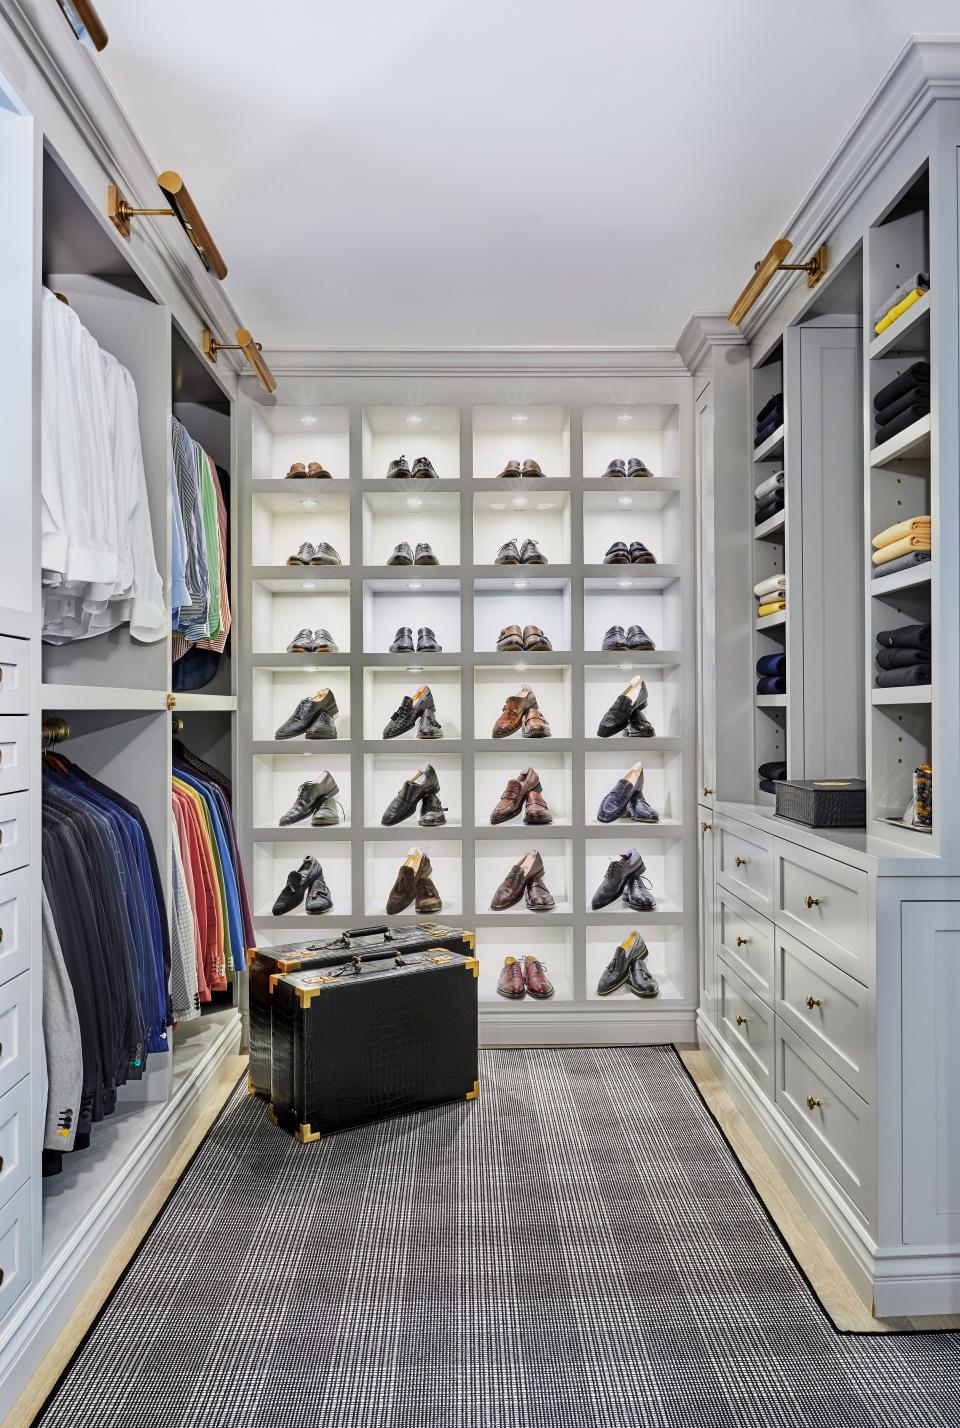 The “his” closet was a joke when the couple moved in, Nicolas recalls, prompting a serious remodel to house not only his wardrobe but extensive shoe collection. “The shoes were a big focal point and we wanted to really display them,” he says. “ I have to show it off, because the way it’s finished, with the lights and shoe cubbies, I think is really artistic.” House of Bijan crocodile luggage sits atop a Prince of Wales print rug by Stark.